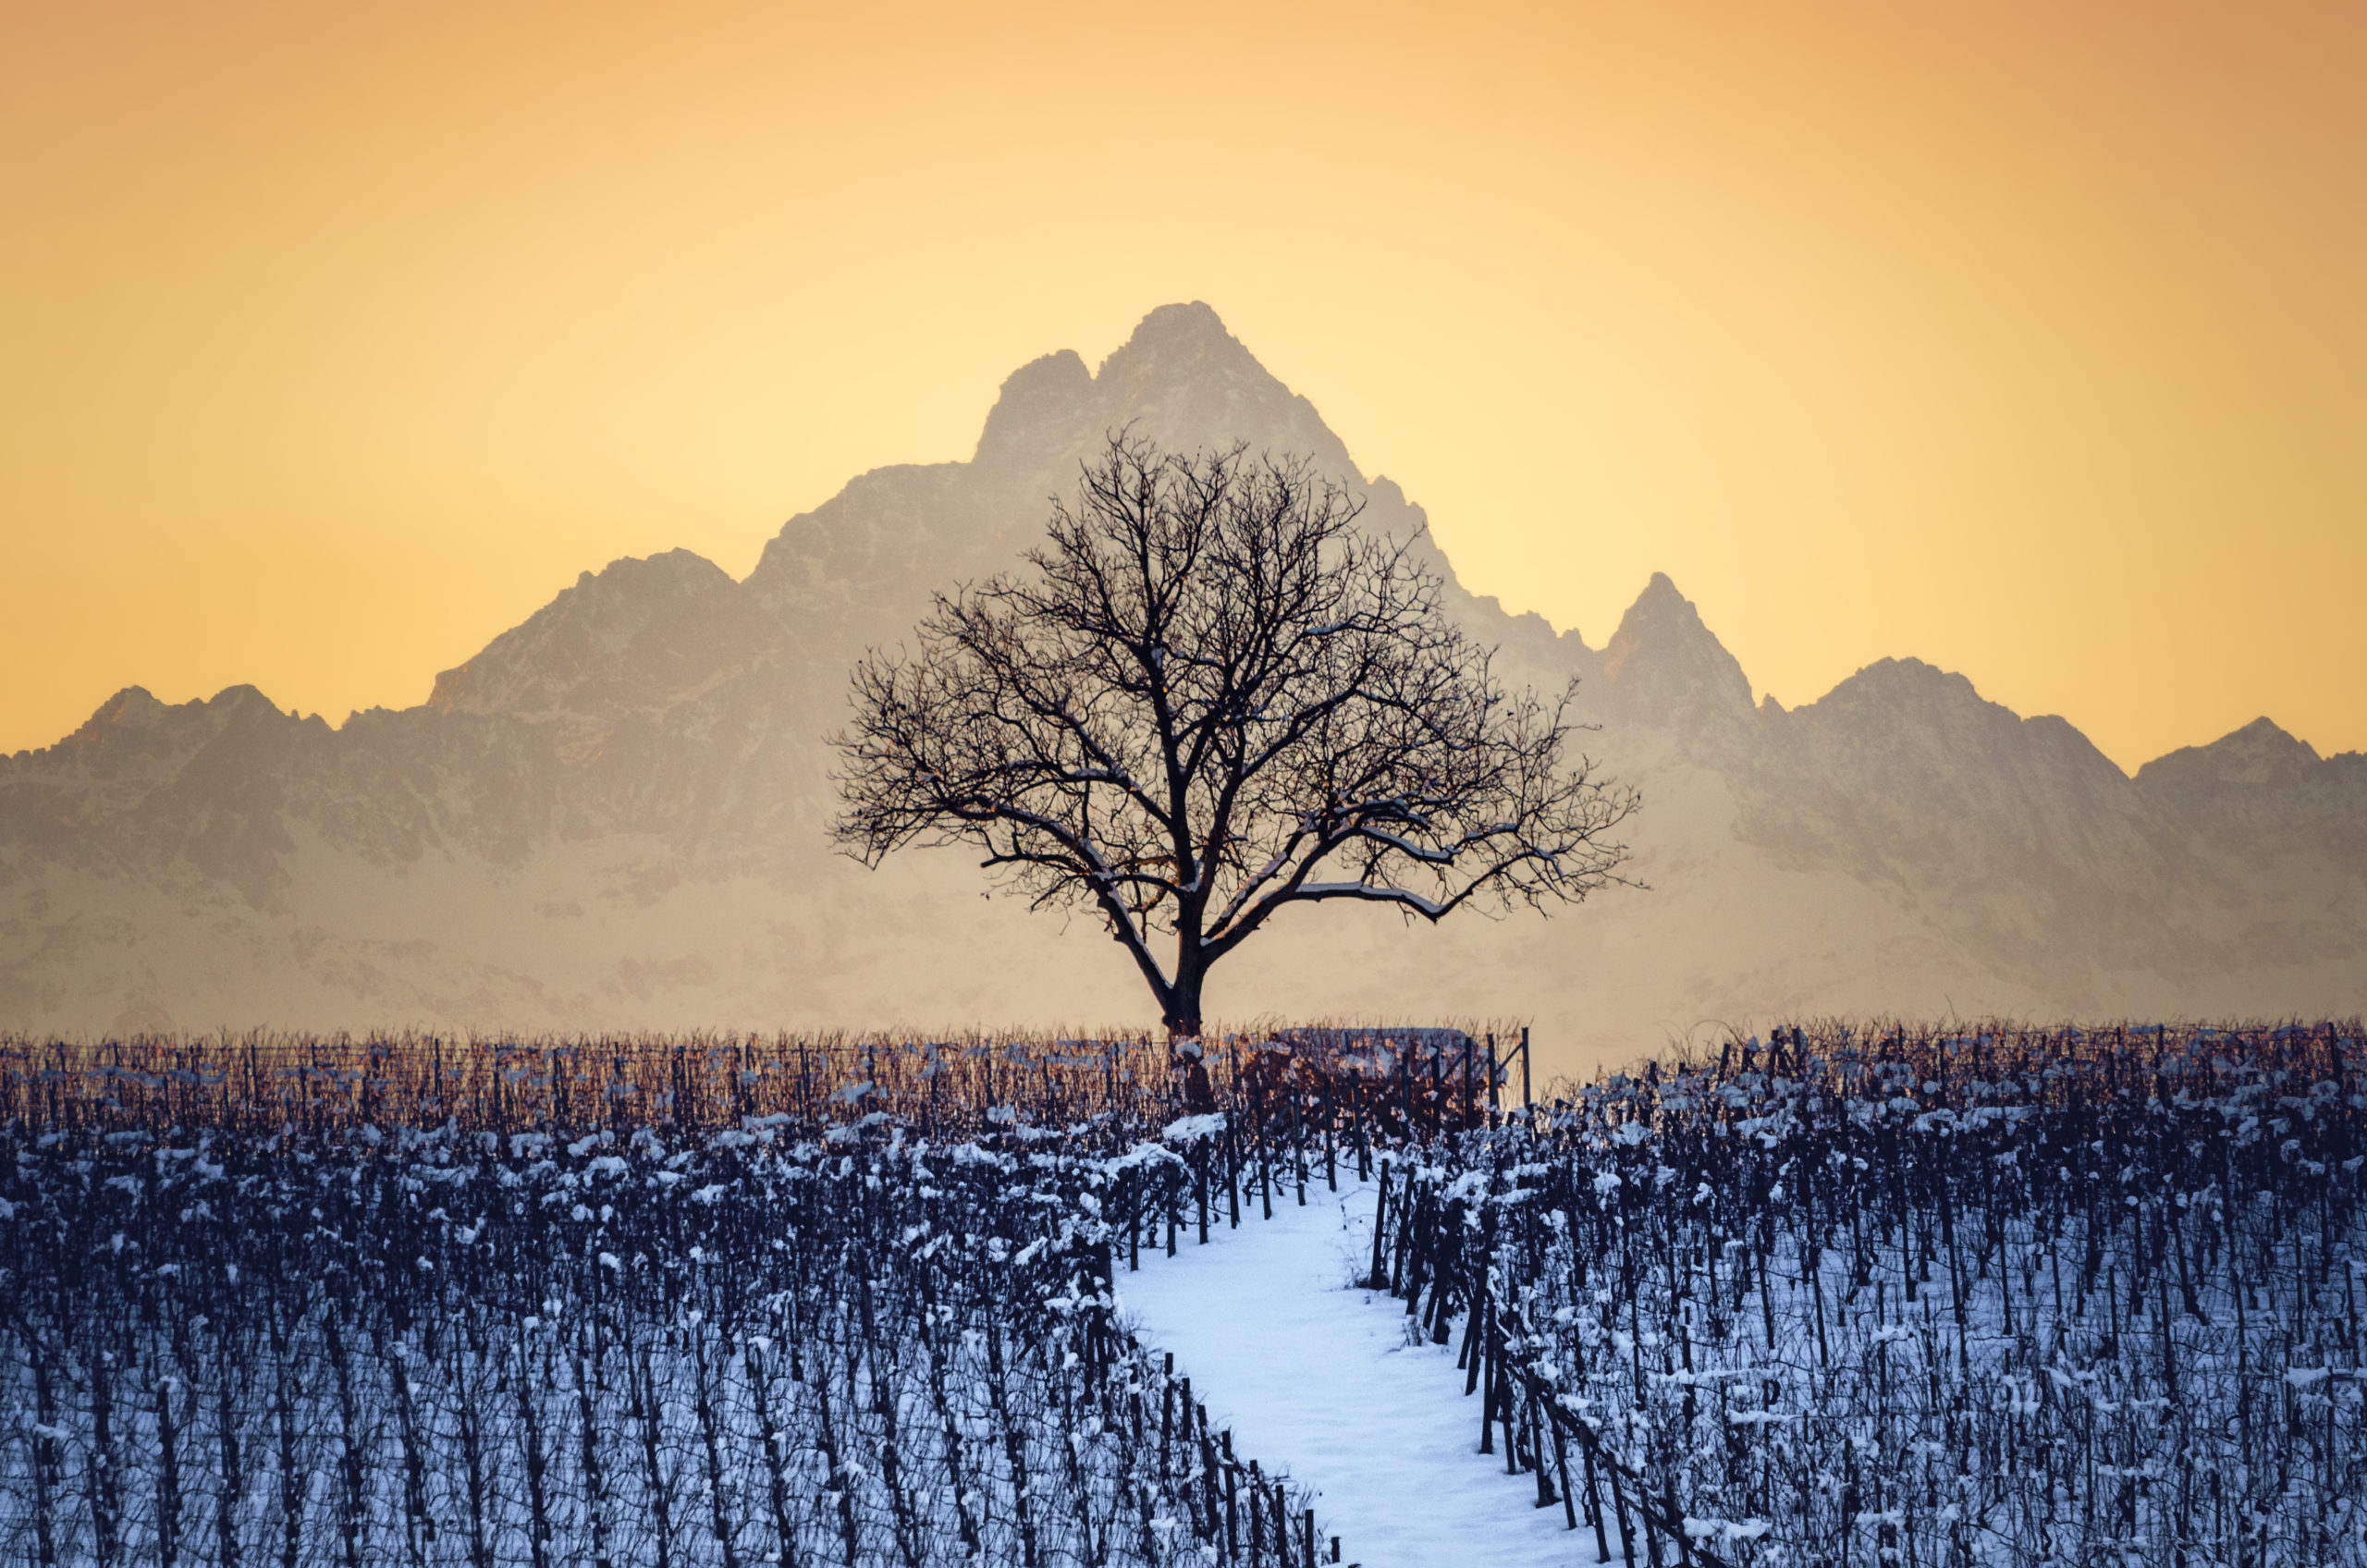 Sunset in winter over the vineyards of Barolo